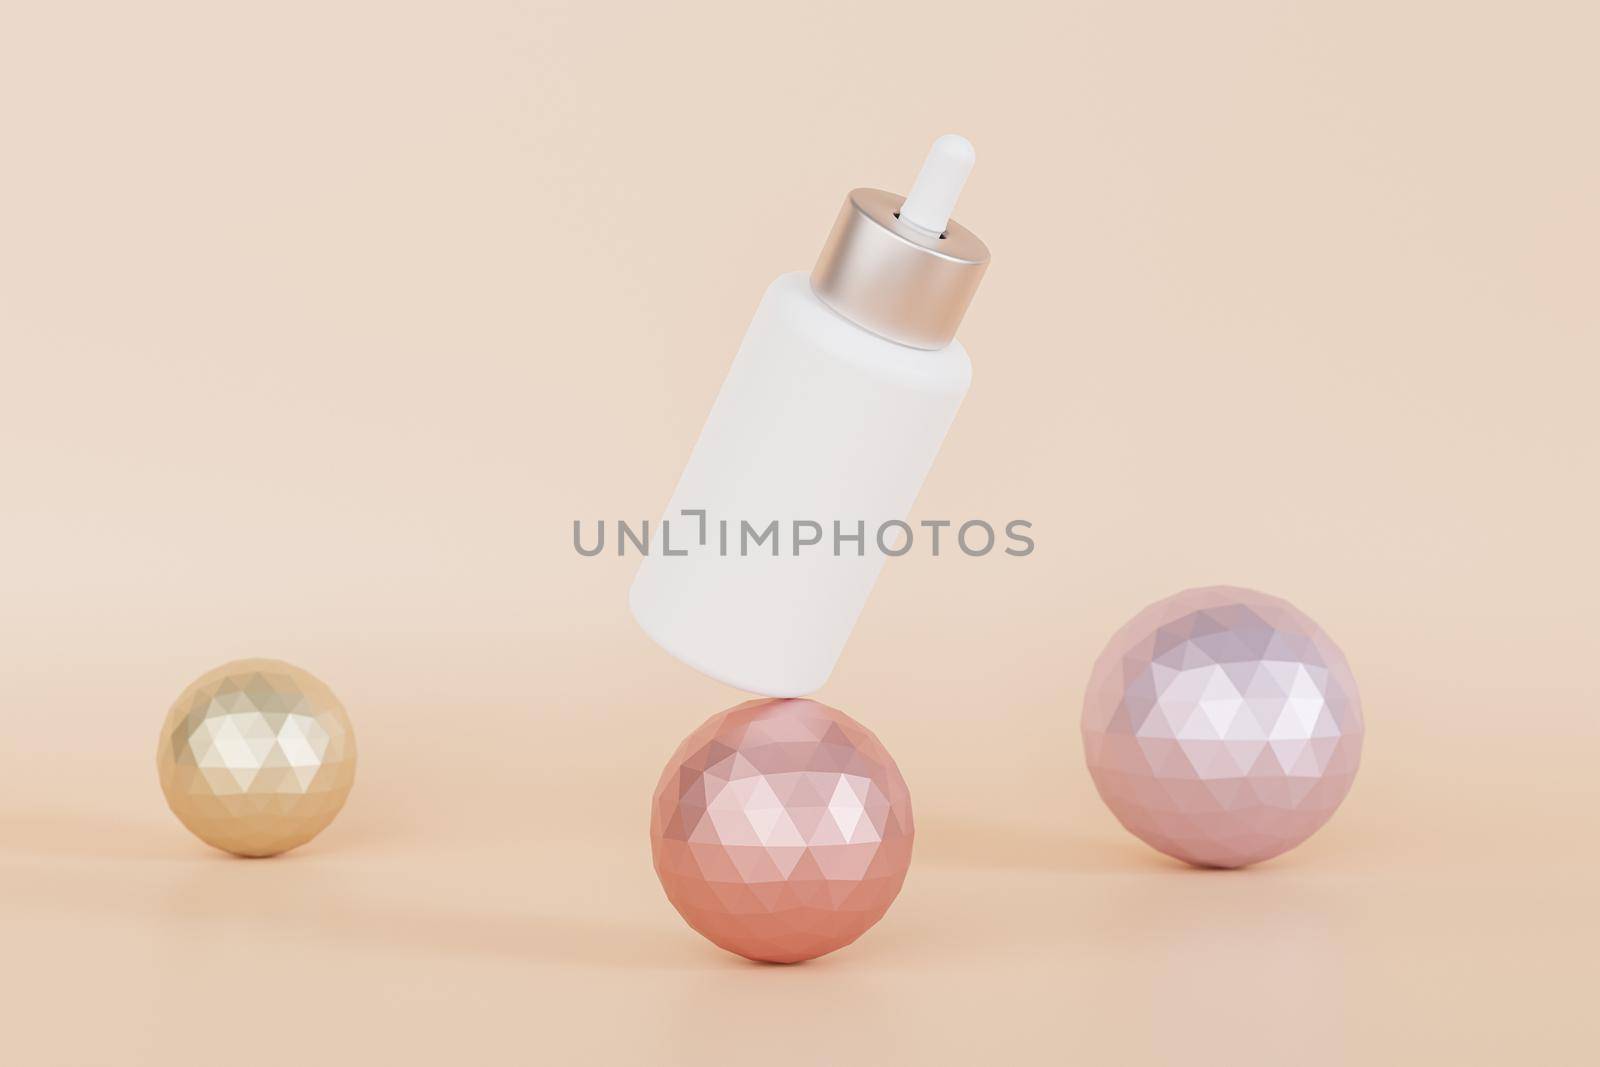 Mockup dropper bottle for cosmetics products or advertising balancing on metallic spheres, 3d illustration render